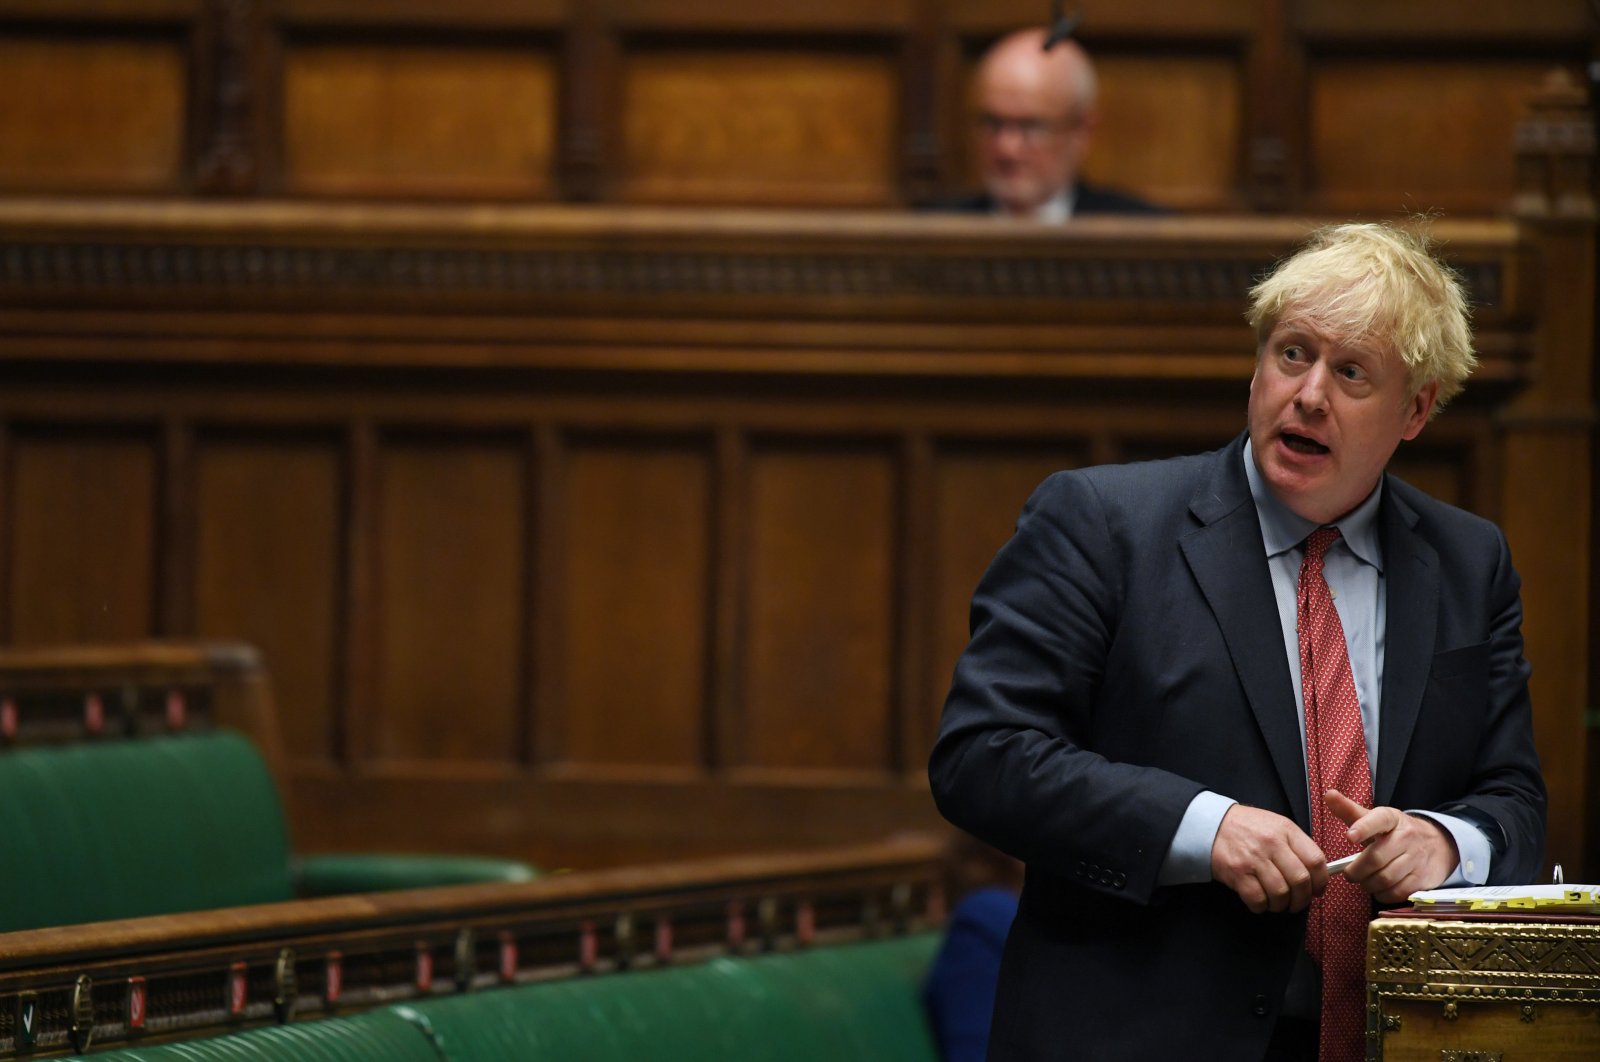 Britain's Prime Minister Boris Johnson speaks during question period at the House of Commons in London, Britain on July 15, 2020. (UK Parliament Photo/Jessica Taylor/ via Reuters)